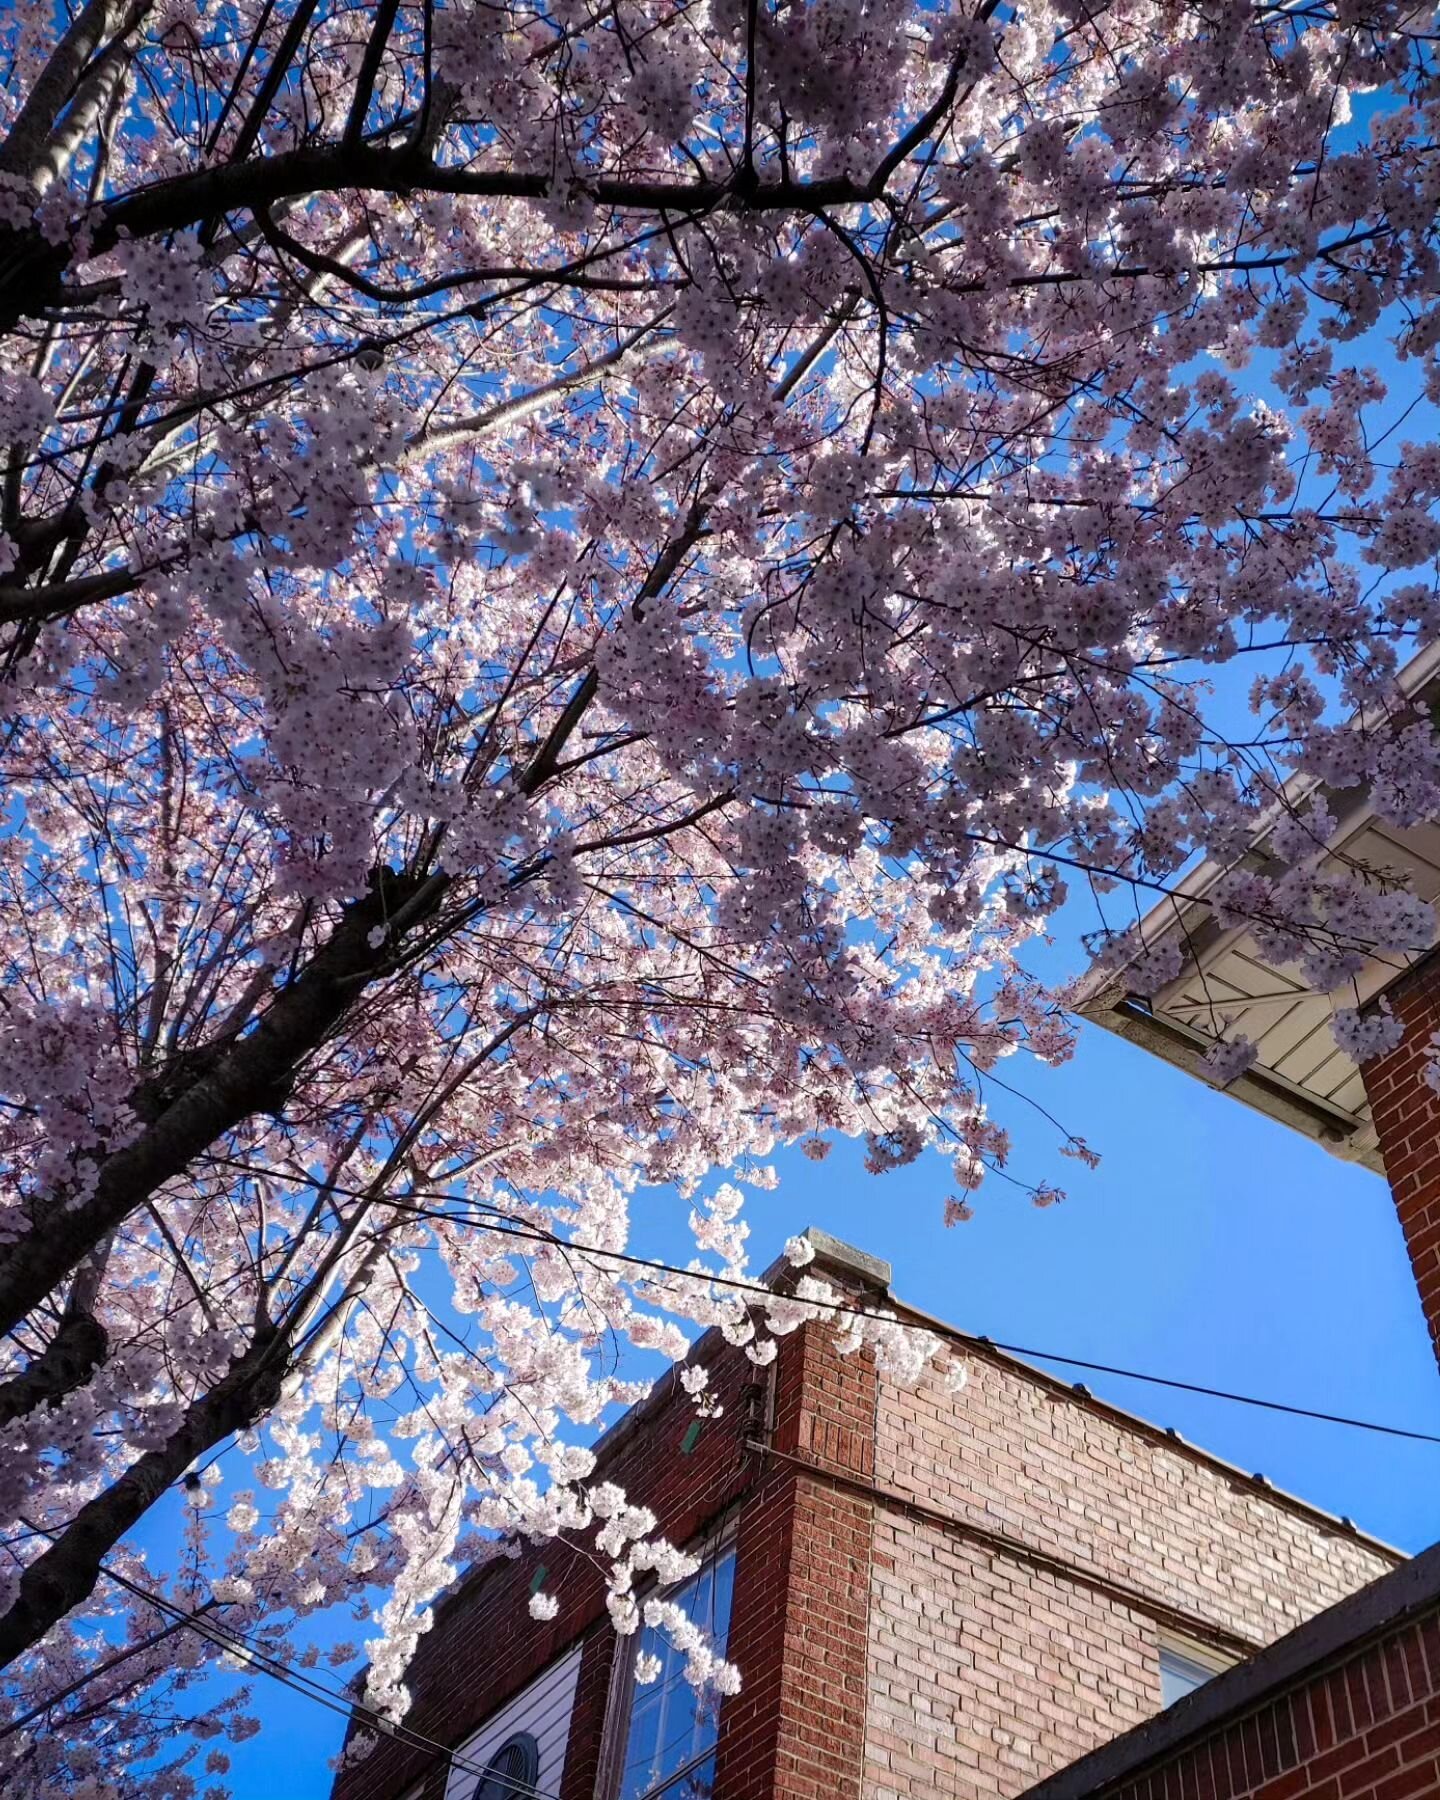 For years we've heard about the beauty that is Virginia in the spring, and this year, we experienced it.

Cherry blossoms are poppin' in #roanokeright right now. We can't get enough of these ephemerial, delicate trees. 

There's something special abo